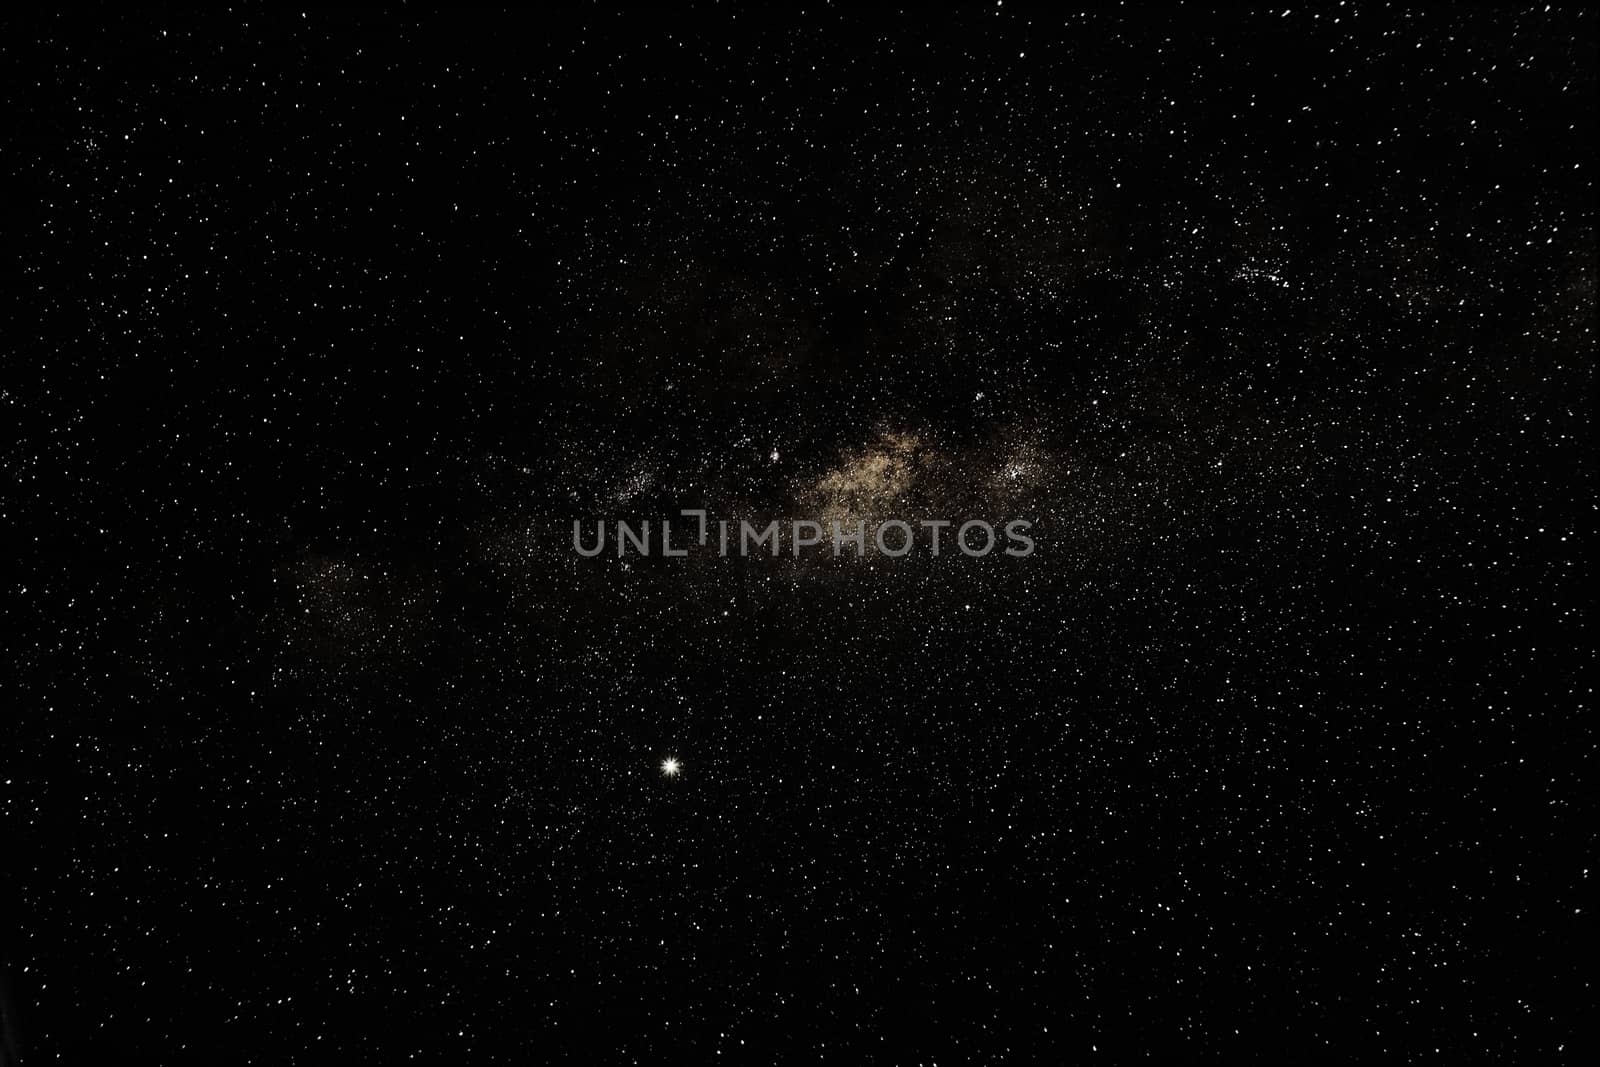 Milky Way above the southern hemisphere